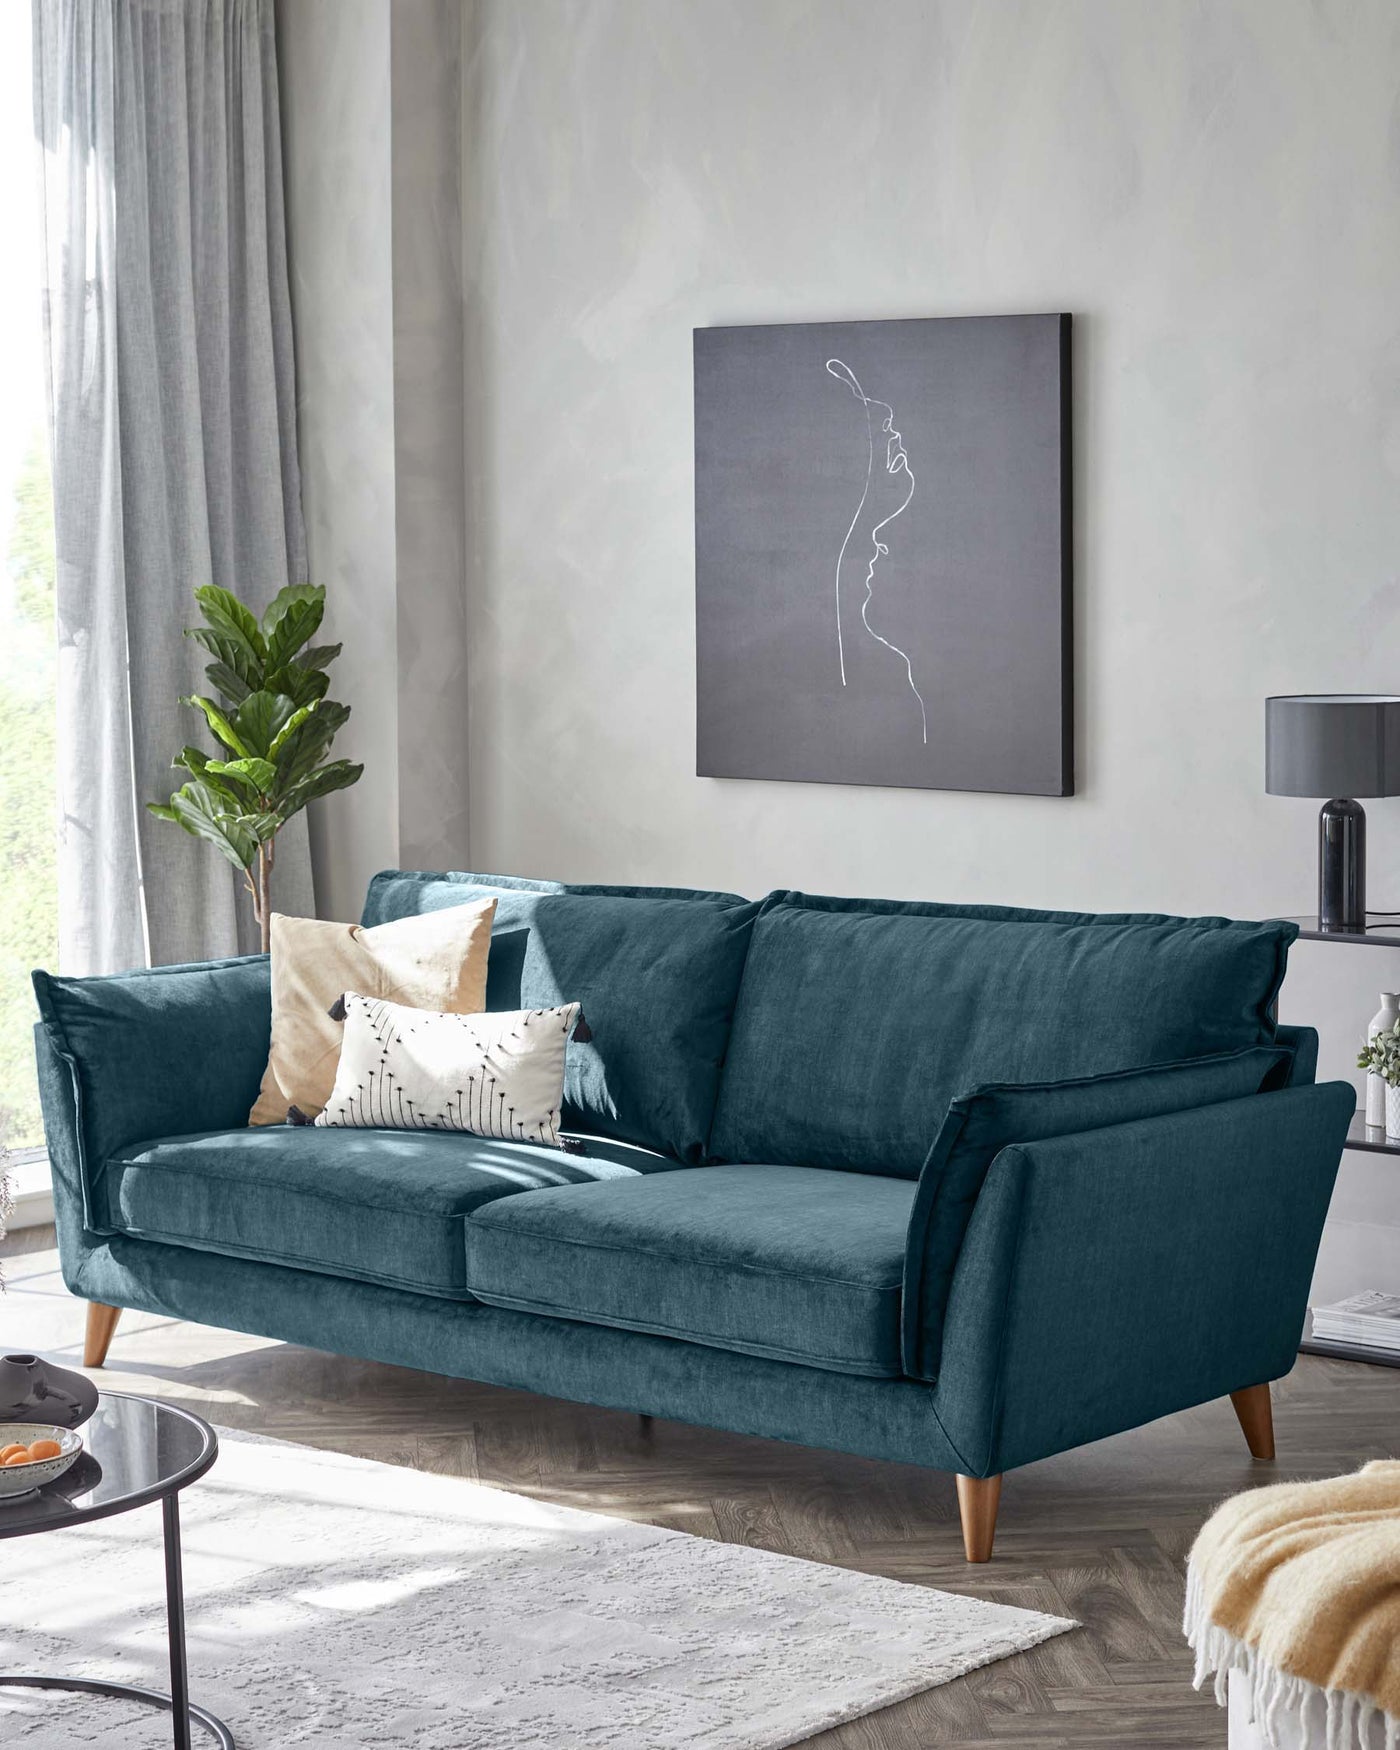 Elegant three-seat sofa upholstered in a plush teal velvet, featuring a clean-lined silhouette with structured arms and back cushions, complemented by three decorative throw pillows in coordinating colours. The sofa stands on tapered wooden legs, set within a modern living room setting with neutral tones.